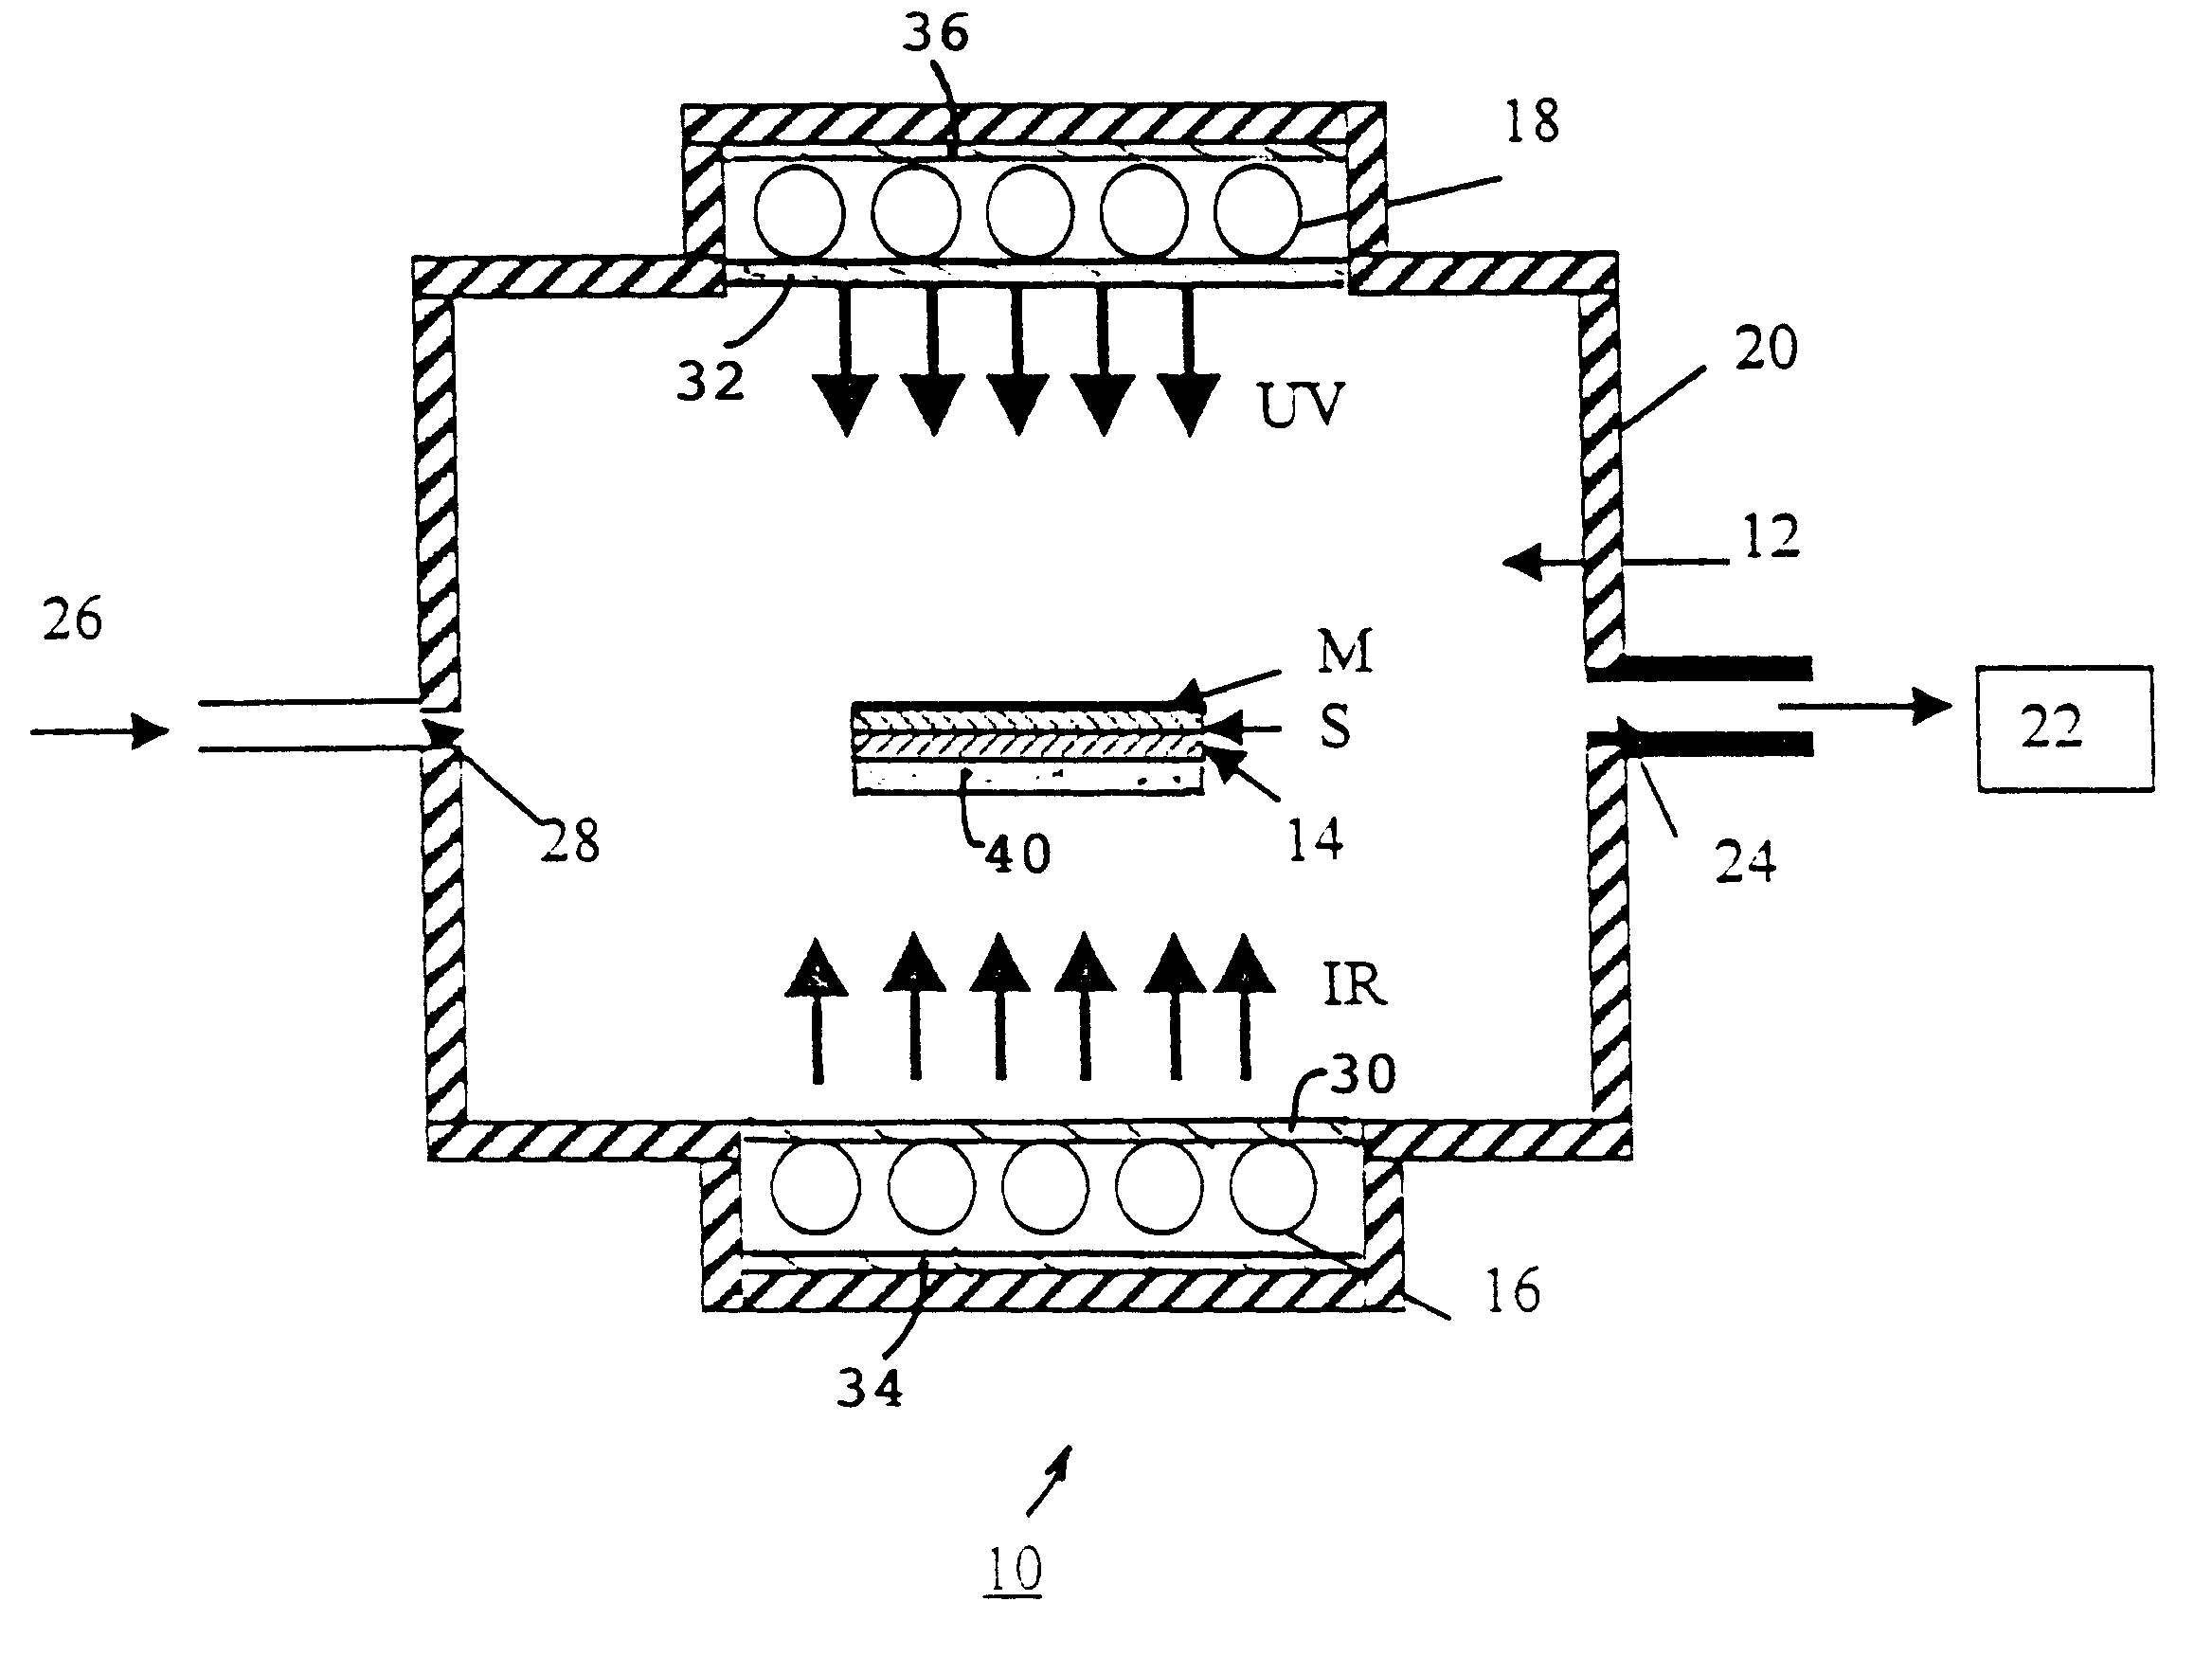 Process and device for processing a material by electromagnetic radiation in a controlled atmosphere